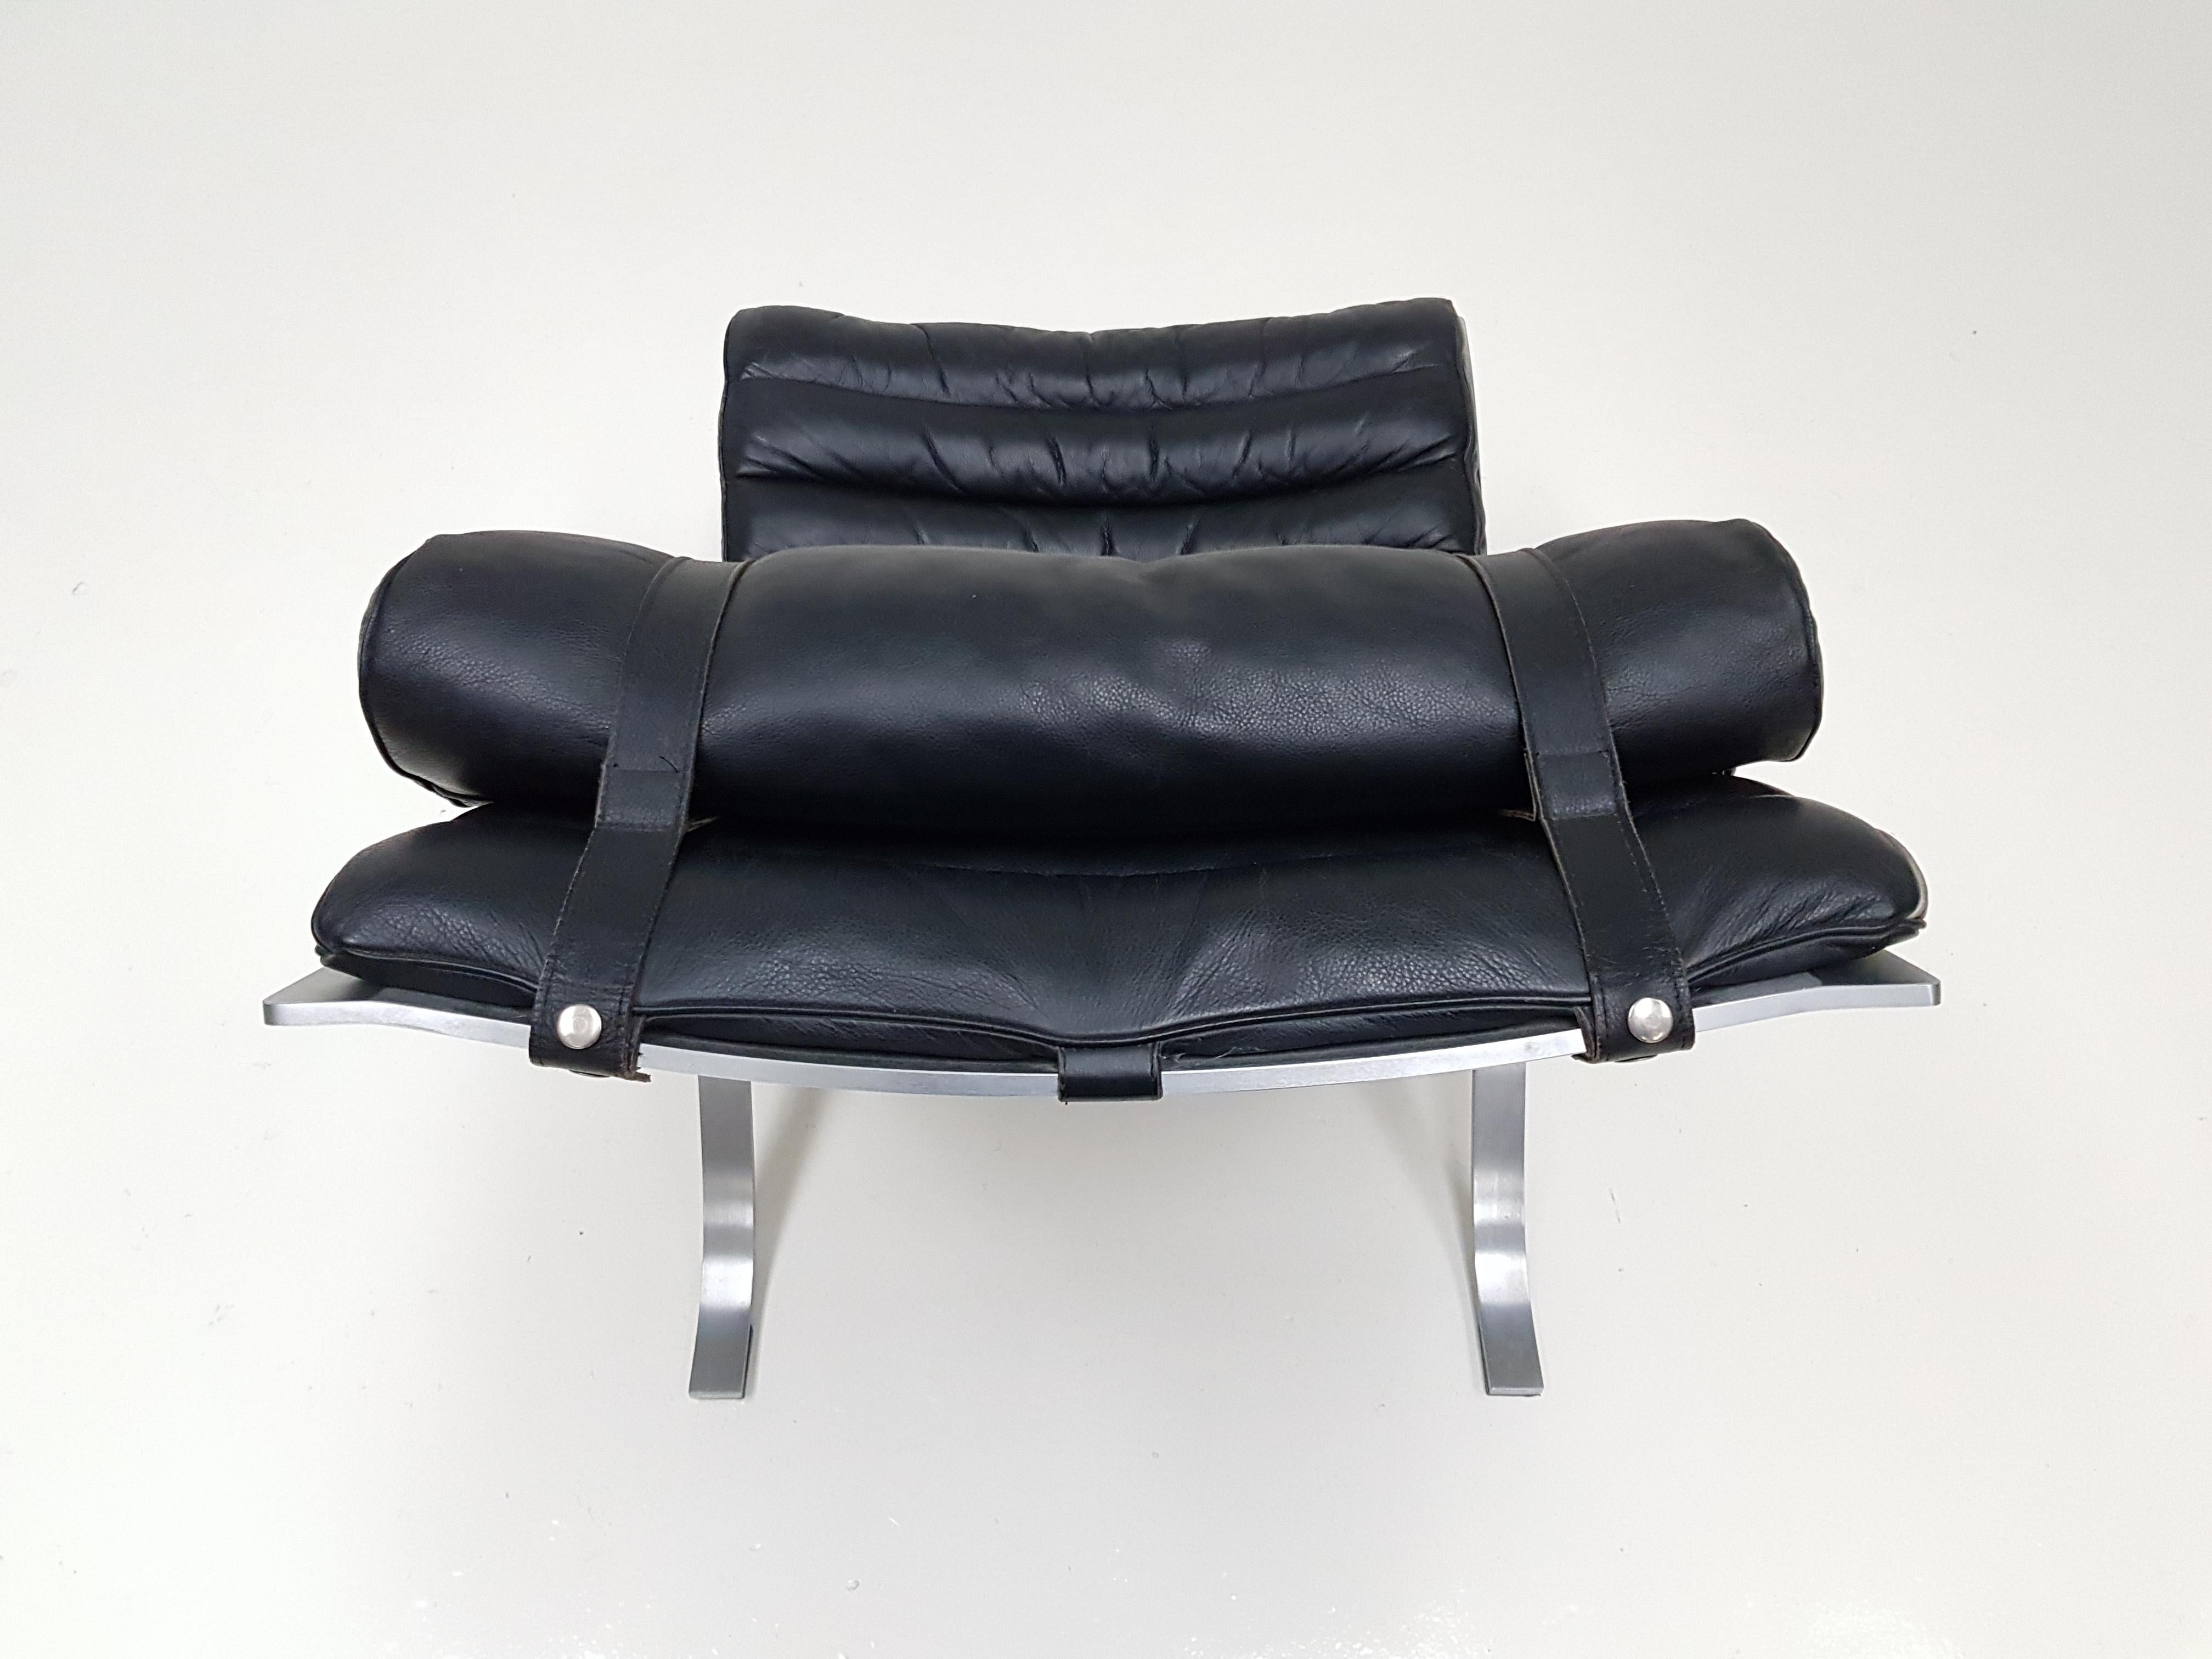 Steel Arne Norell 'Ari' Lounge Chair with Ottoman, 1966, Norell Möbe